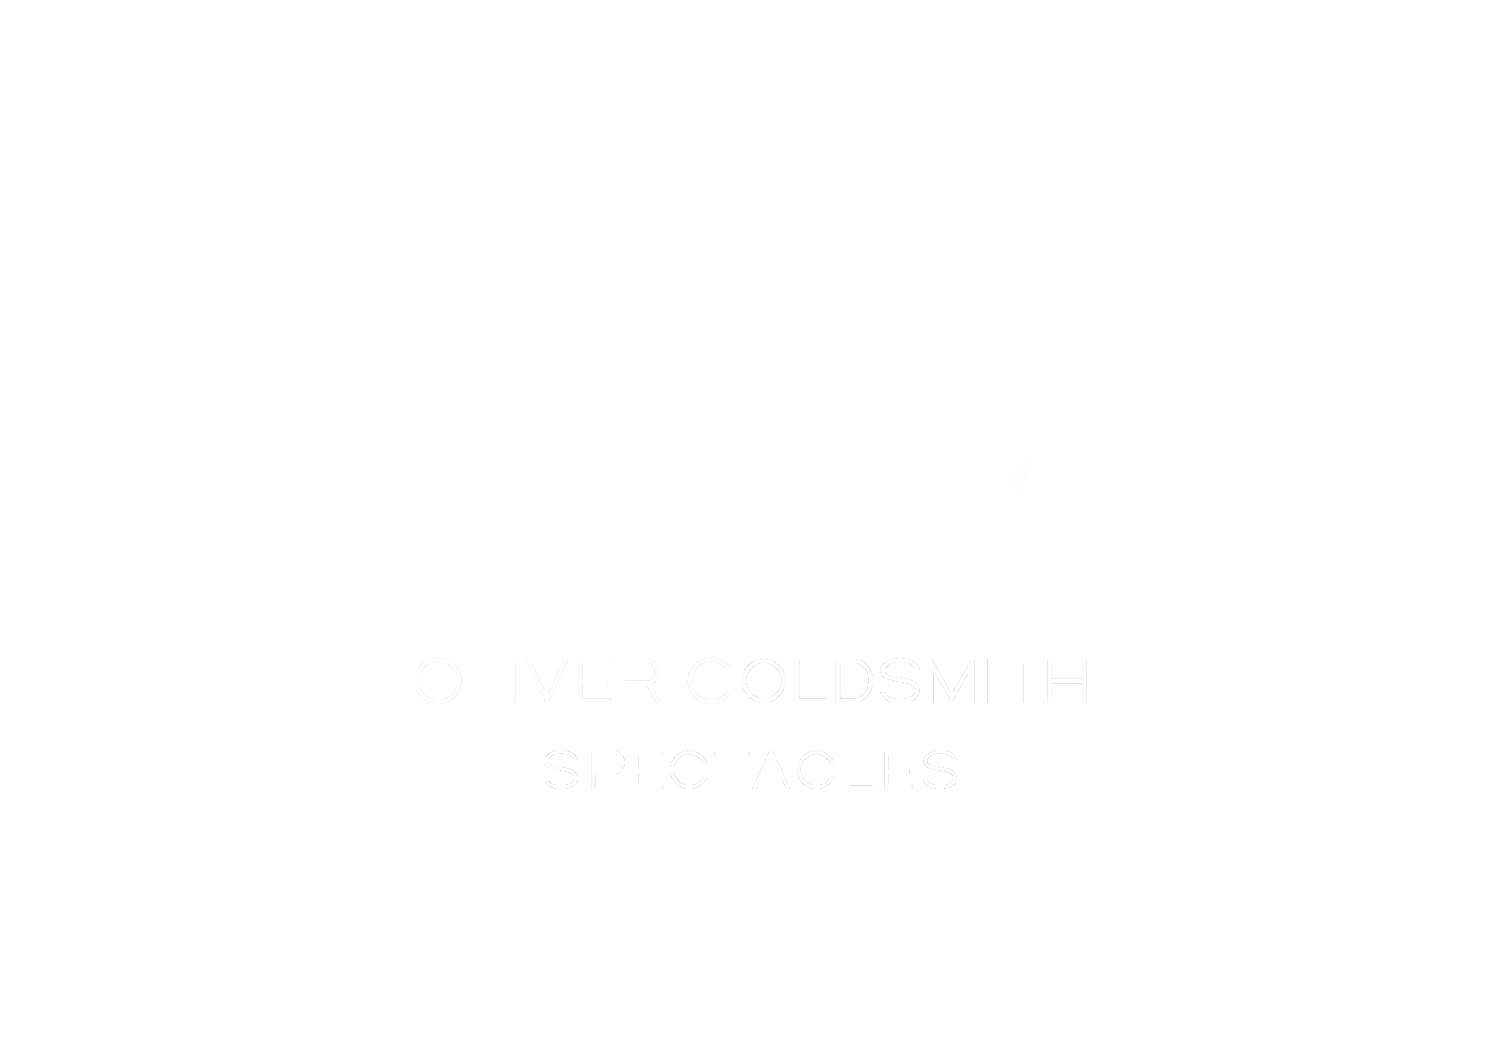 OLIVER GOLDSMITH SPECTACLES